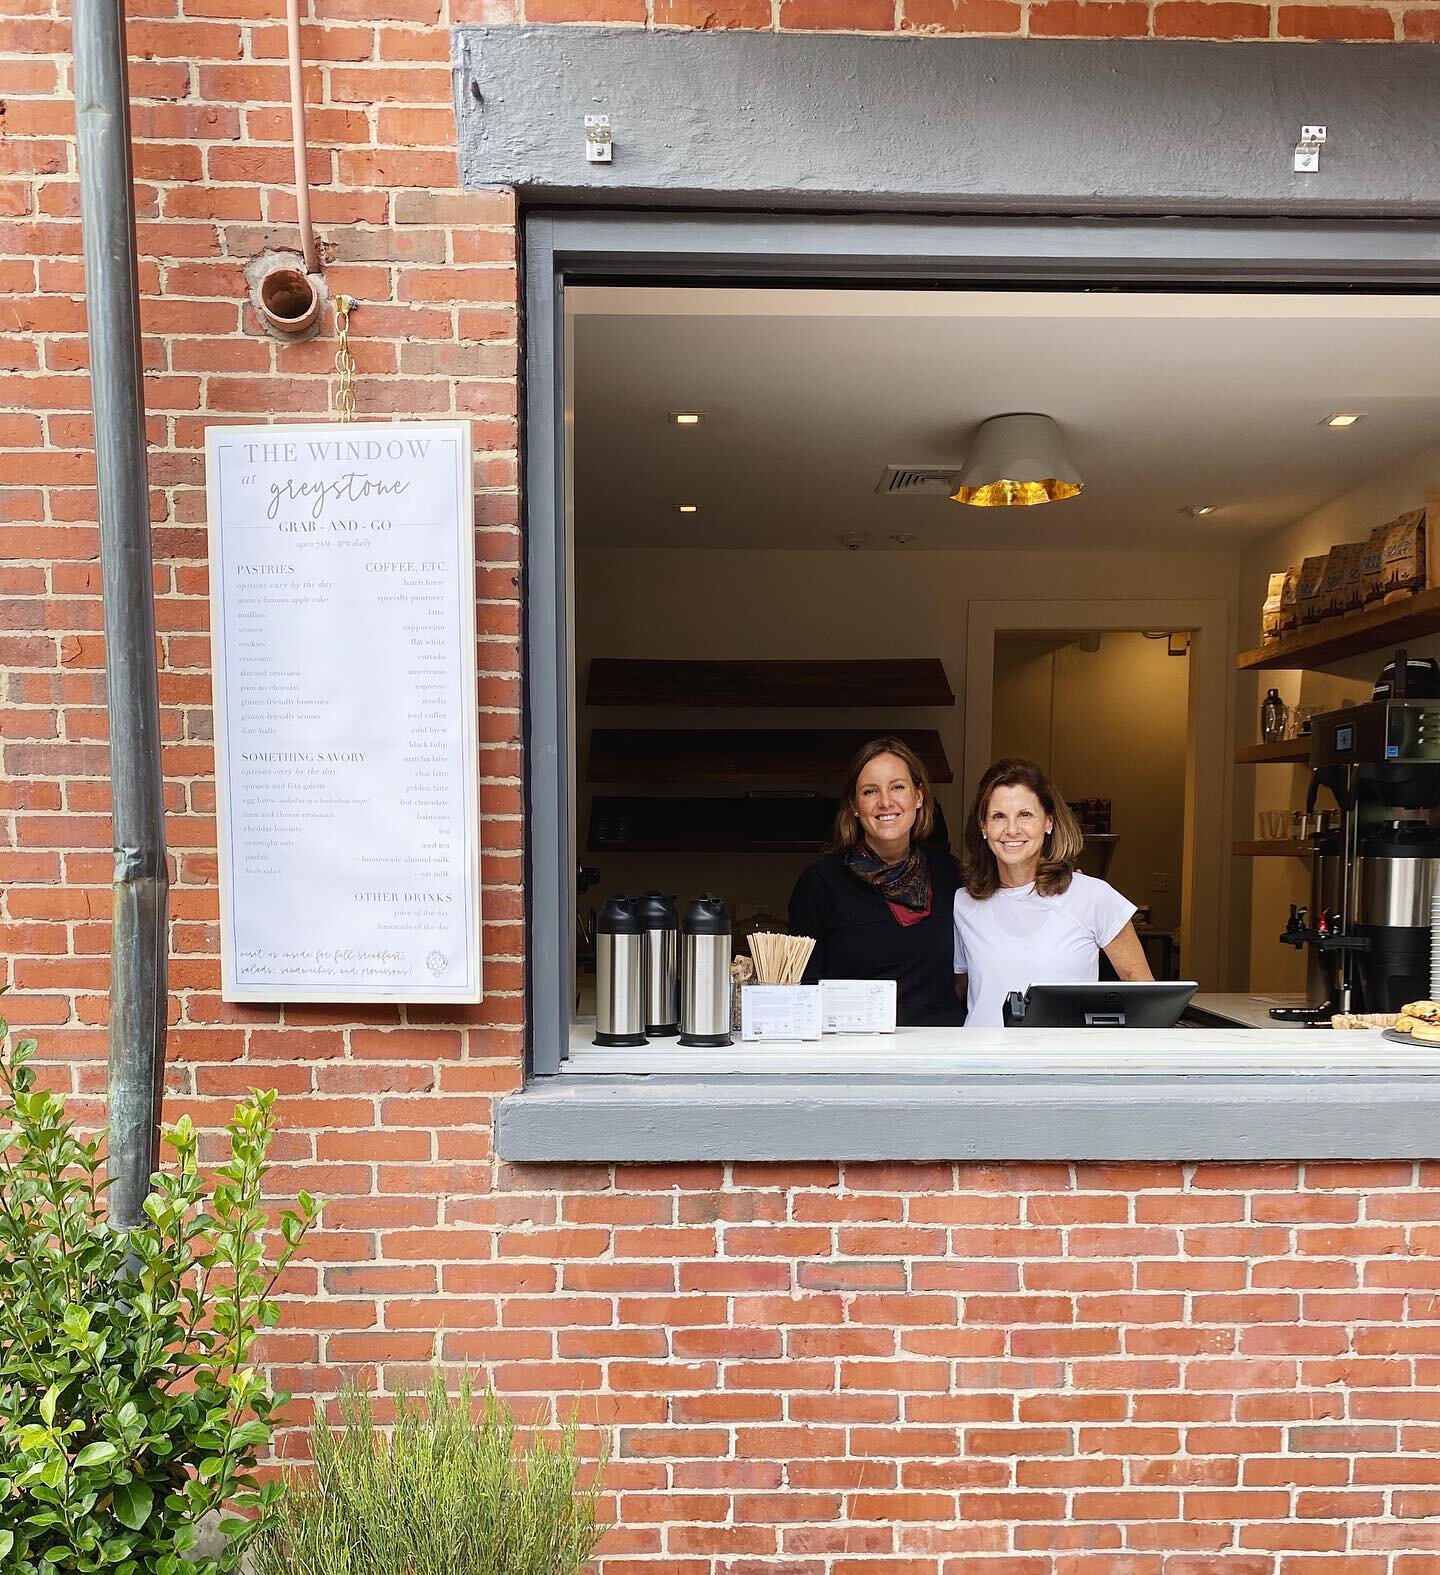 THE GRAB-AND-GO WALK UP WINDOW AT GREYSTONE IS OPENING! 
.
Come see us on Monday, 9/28 and every day after that from 7AM - 4PM for specialty coffee, tea, pastries, and savory items. We&rsquo;ll be opening the rest of the cafe in a few weeks (weekday 